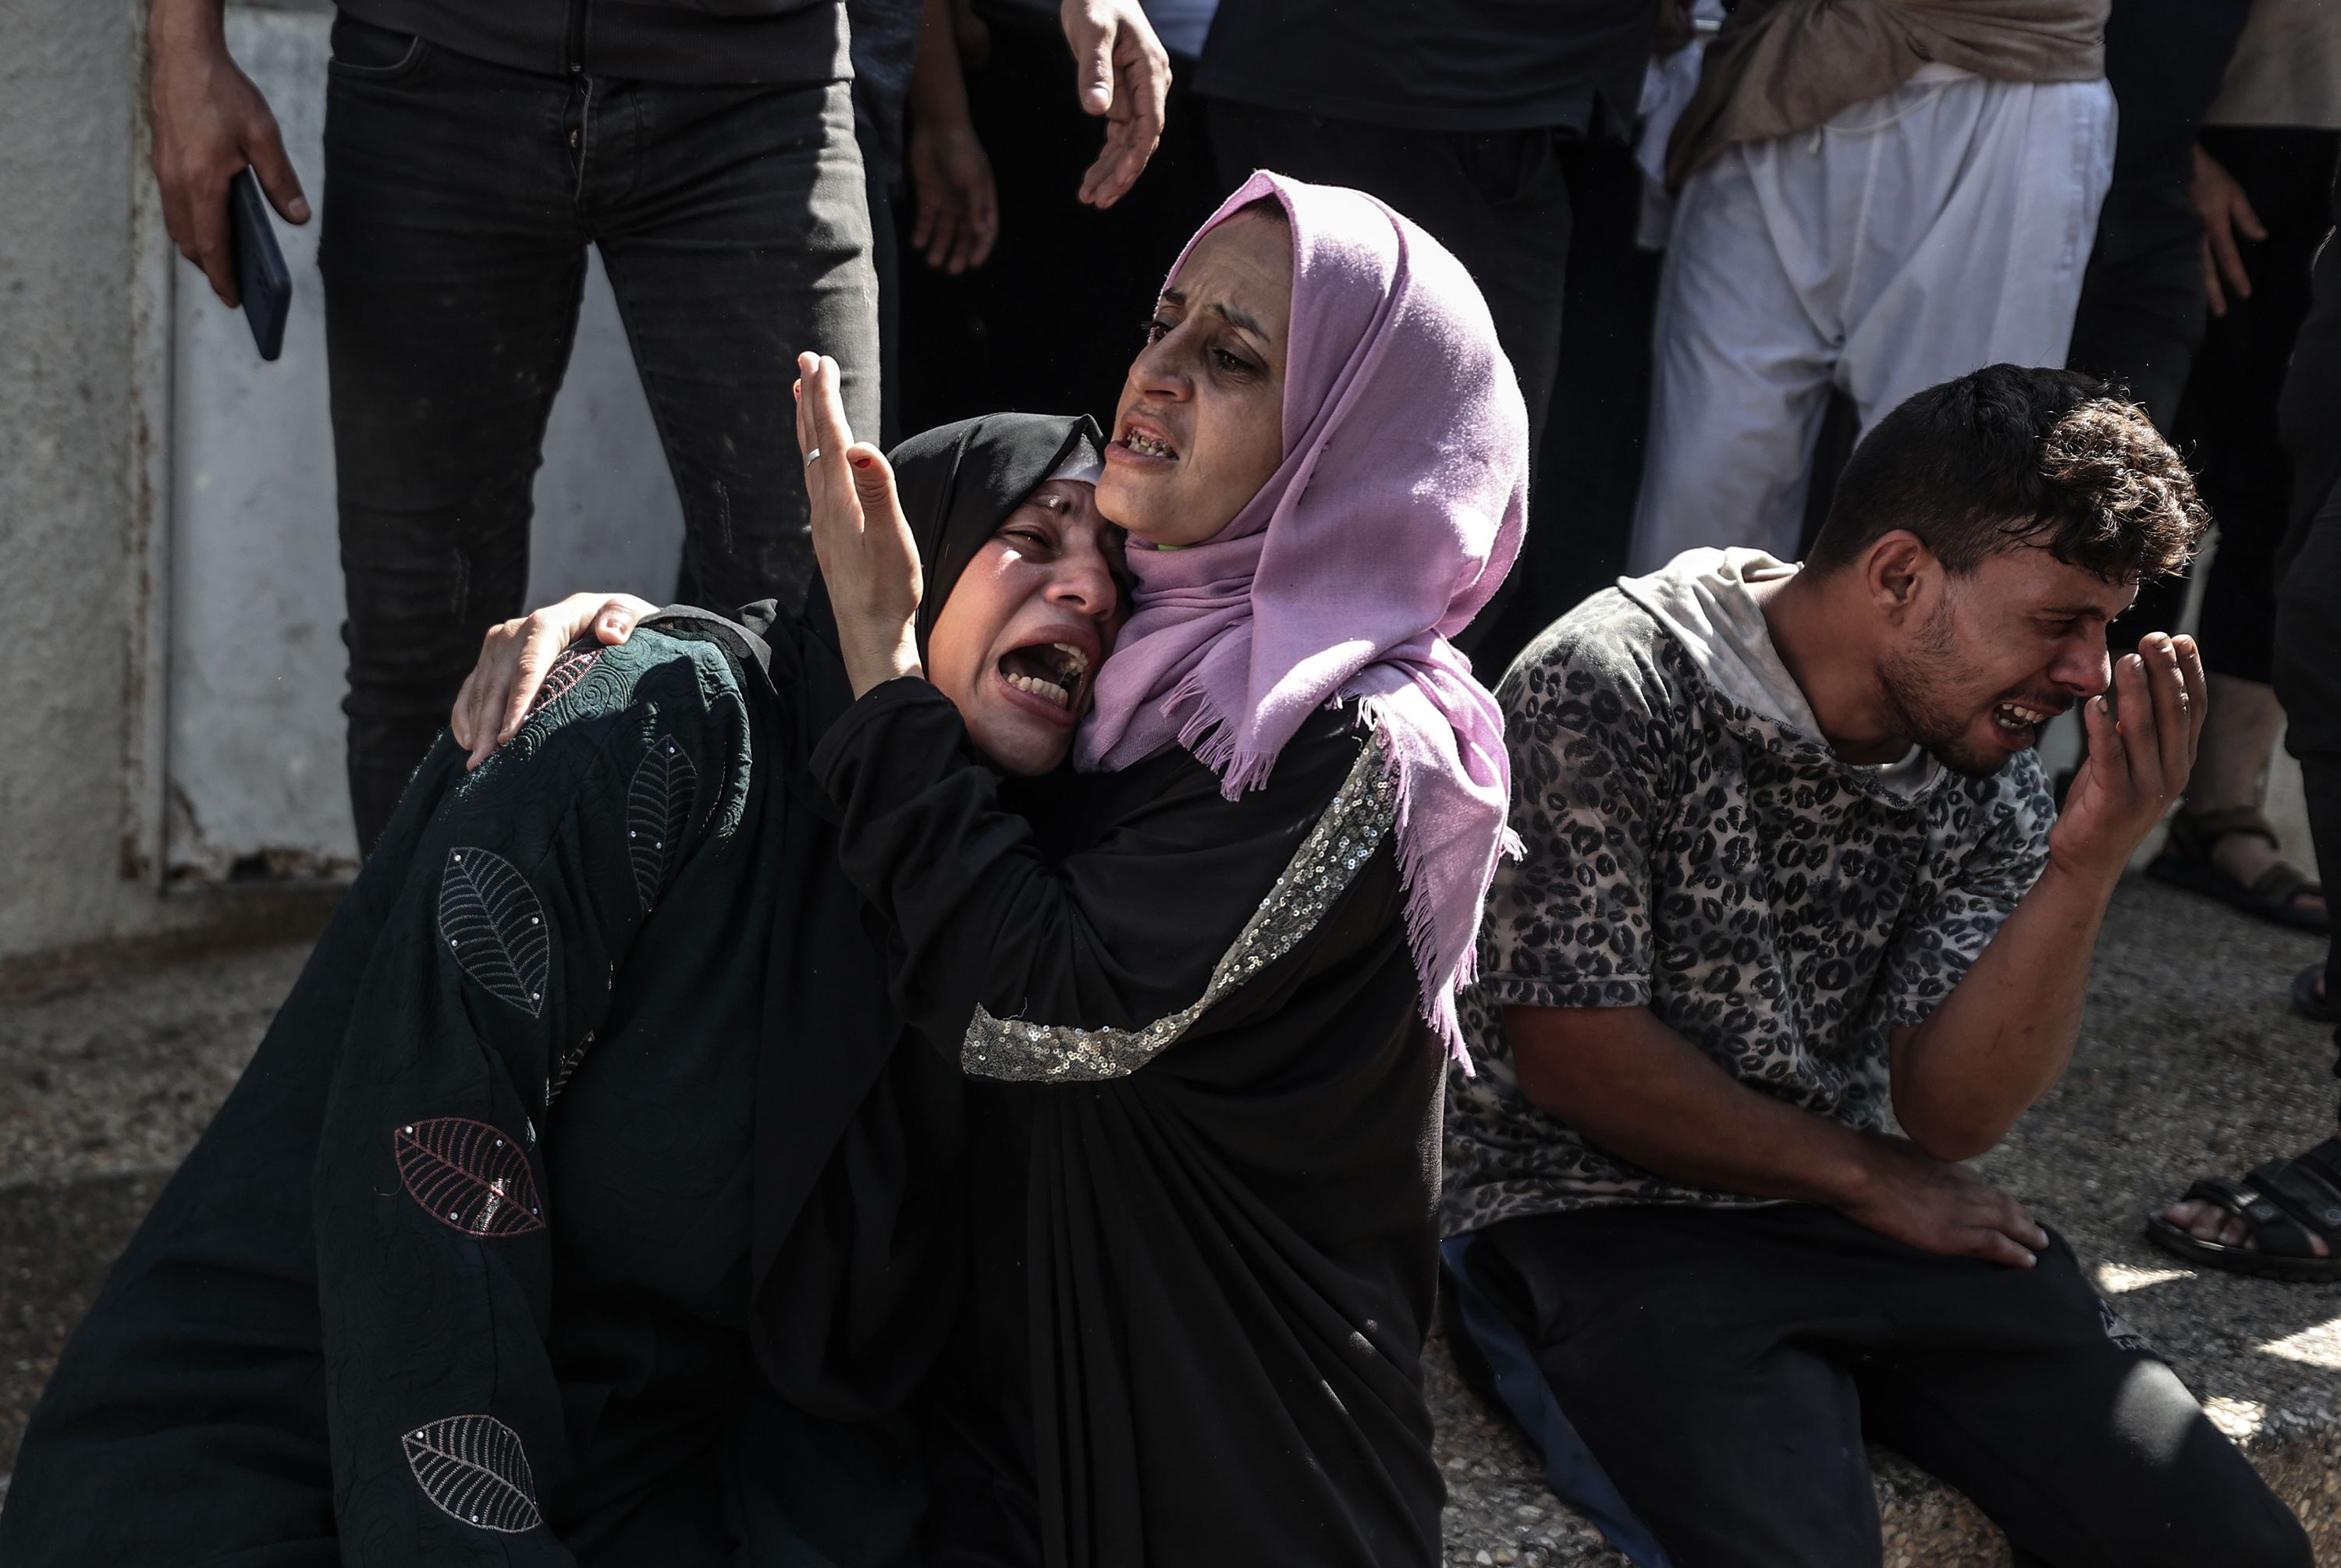 Relatives of Palestinians killed on Saturday, October 7, mourn at the morgue of a hospital in Gaza.